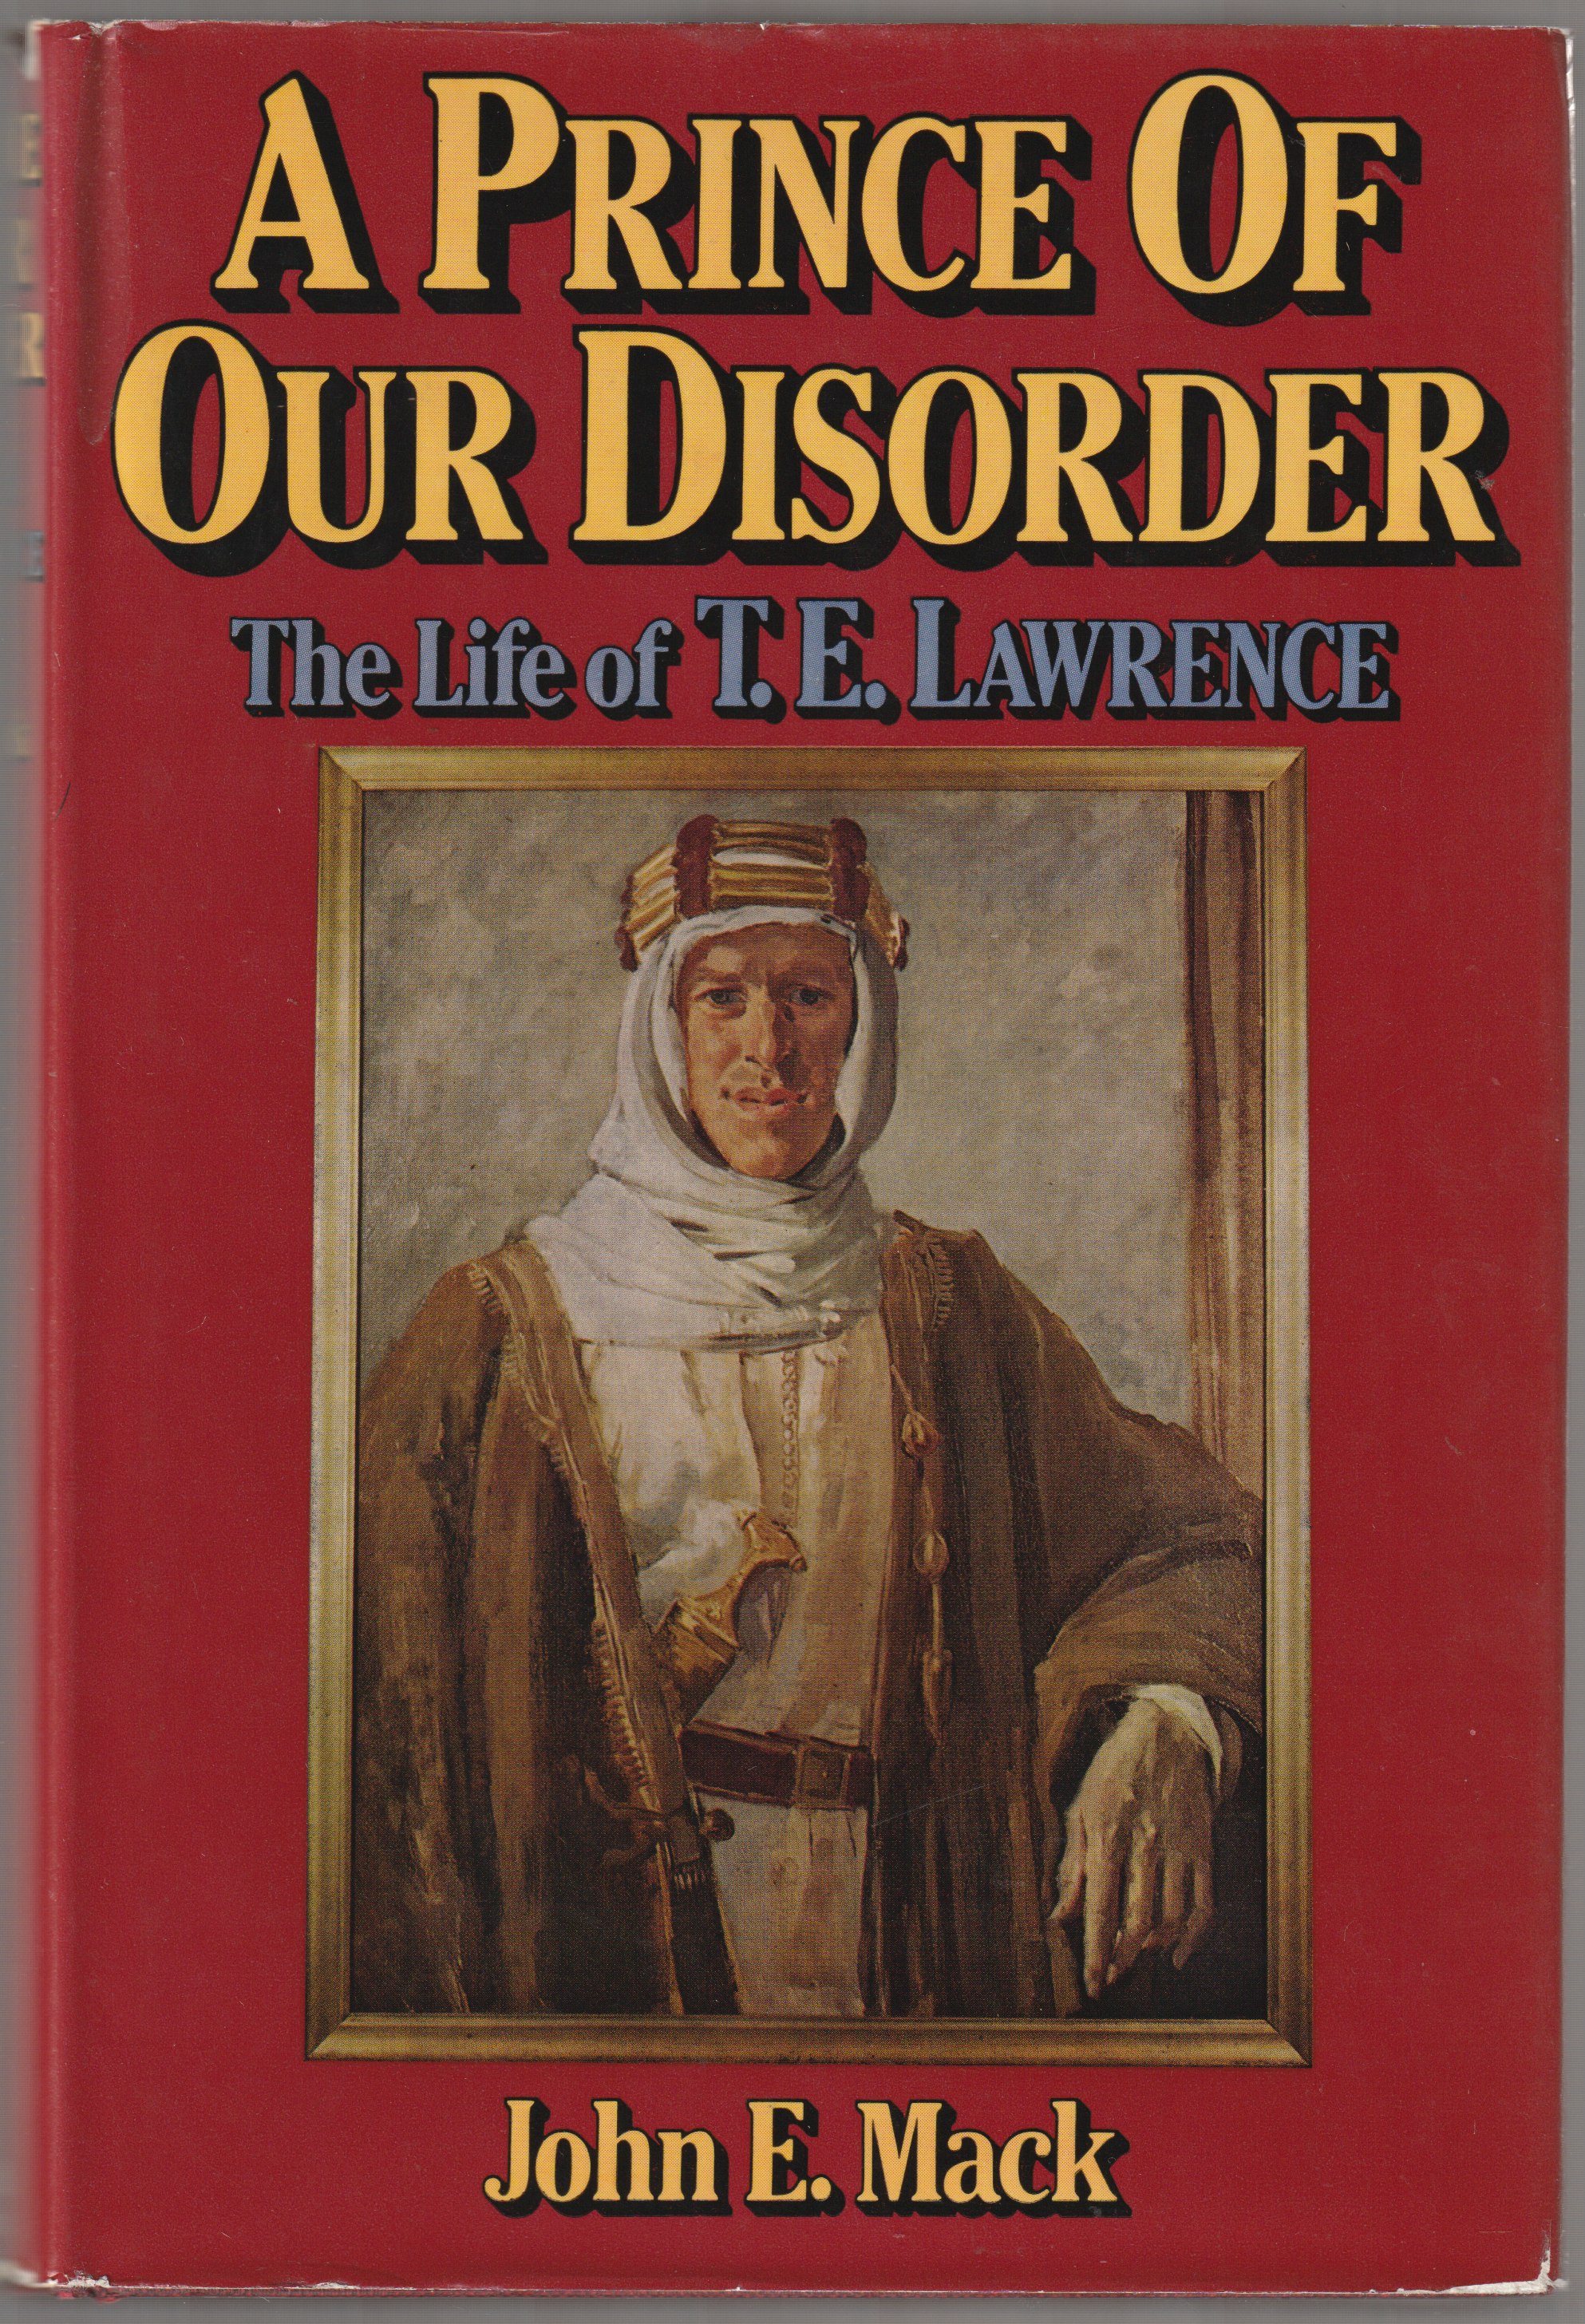 A prince of our disorder : the life of T.E. Lawrence.